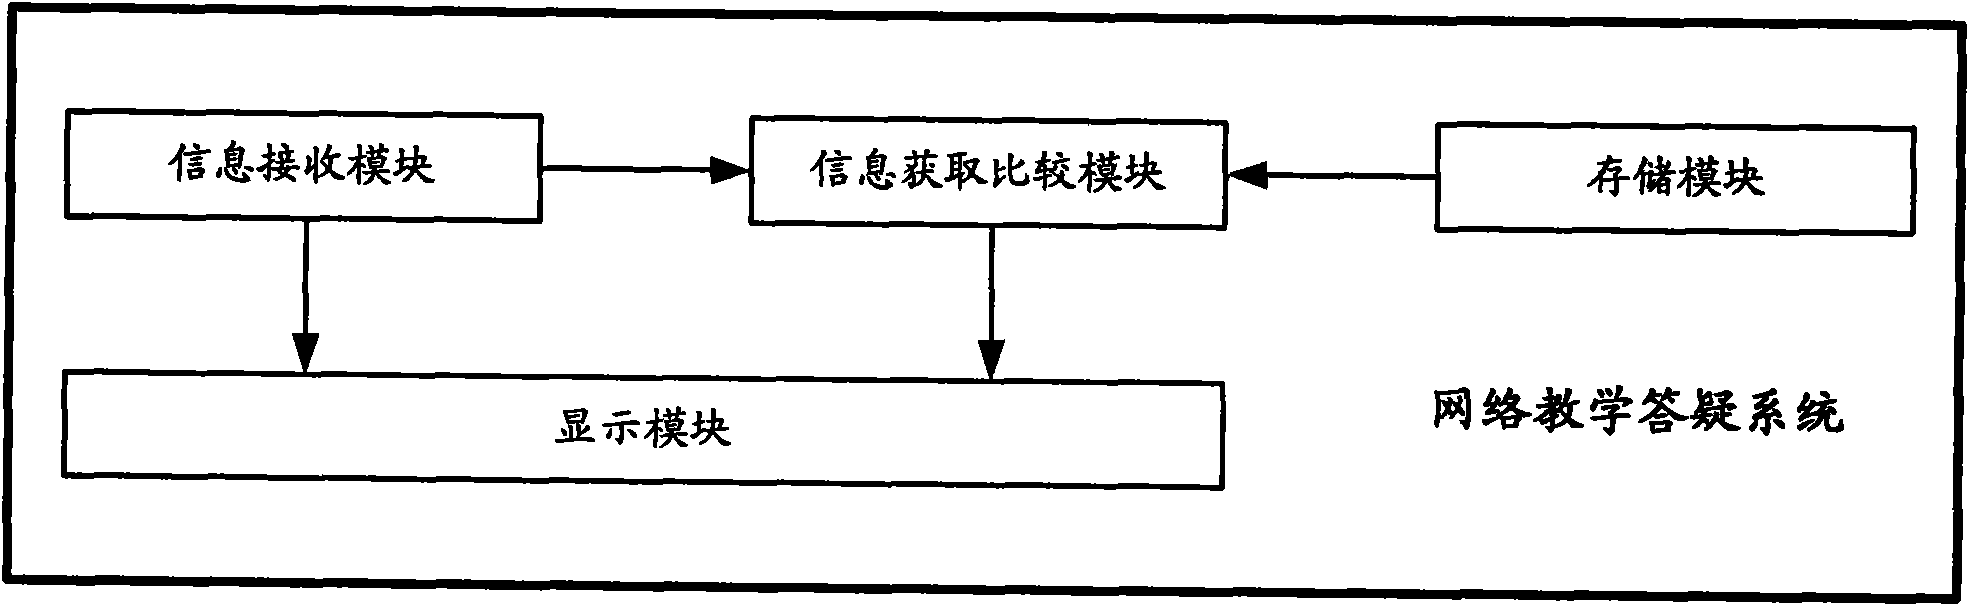 System for network teaching answering